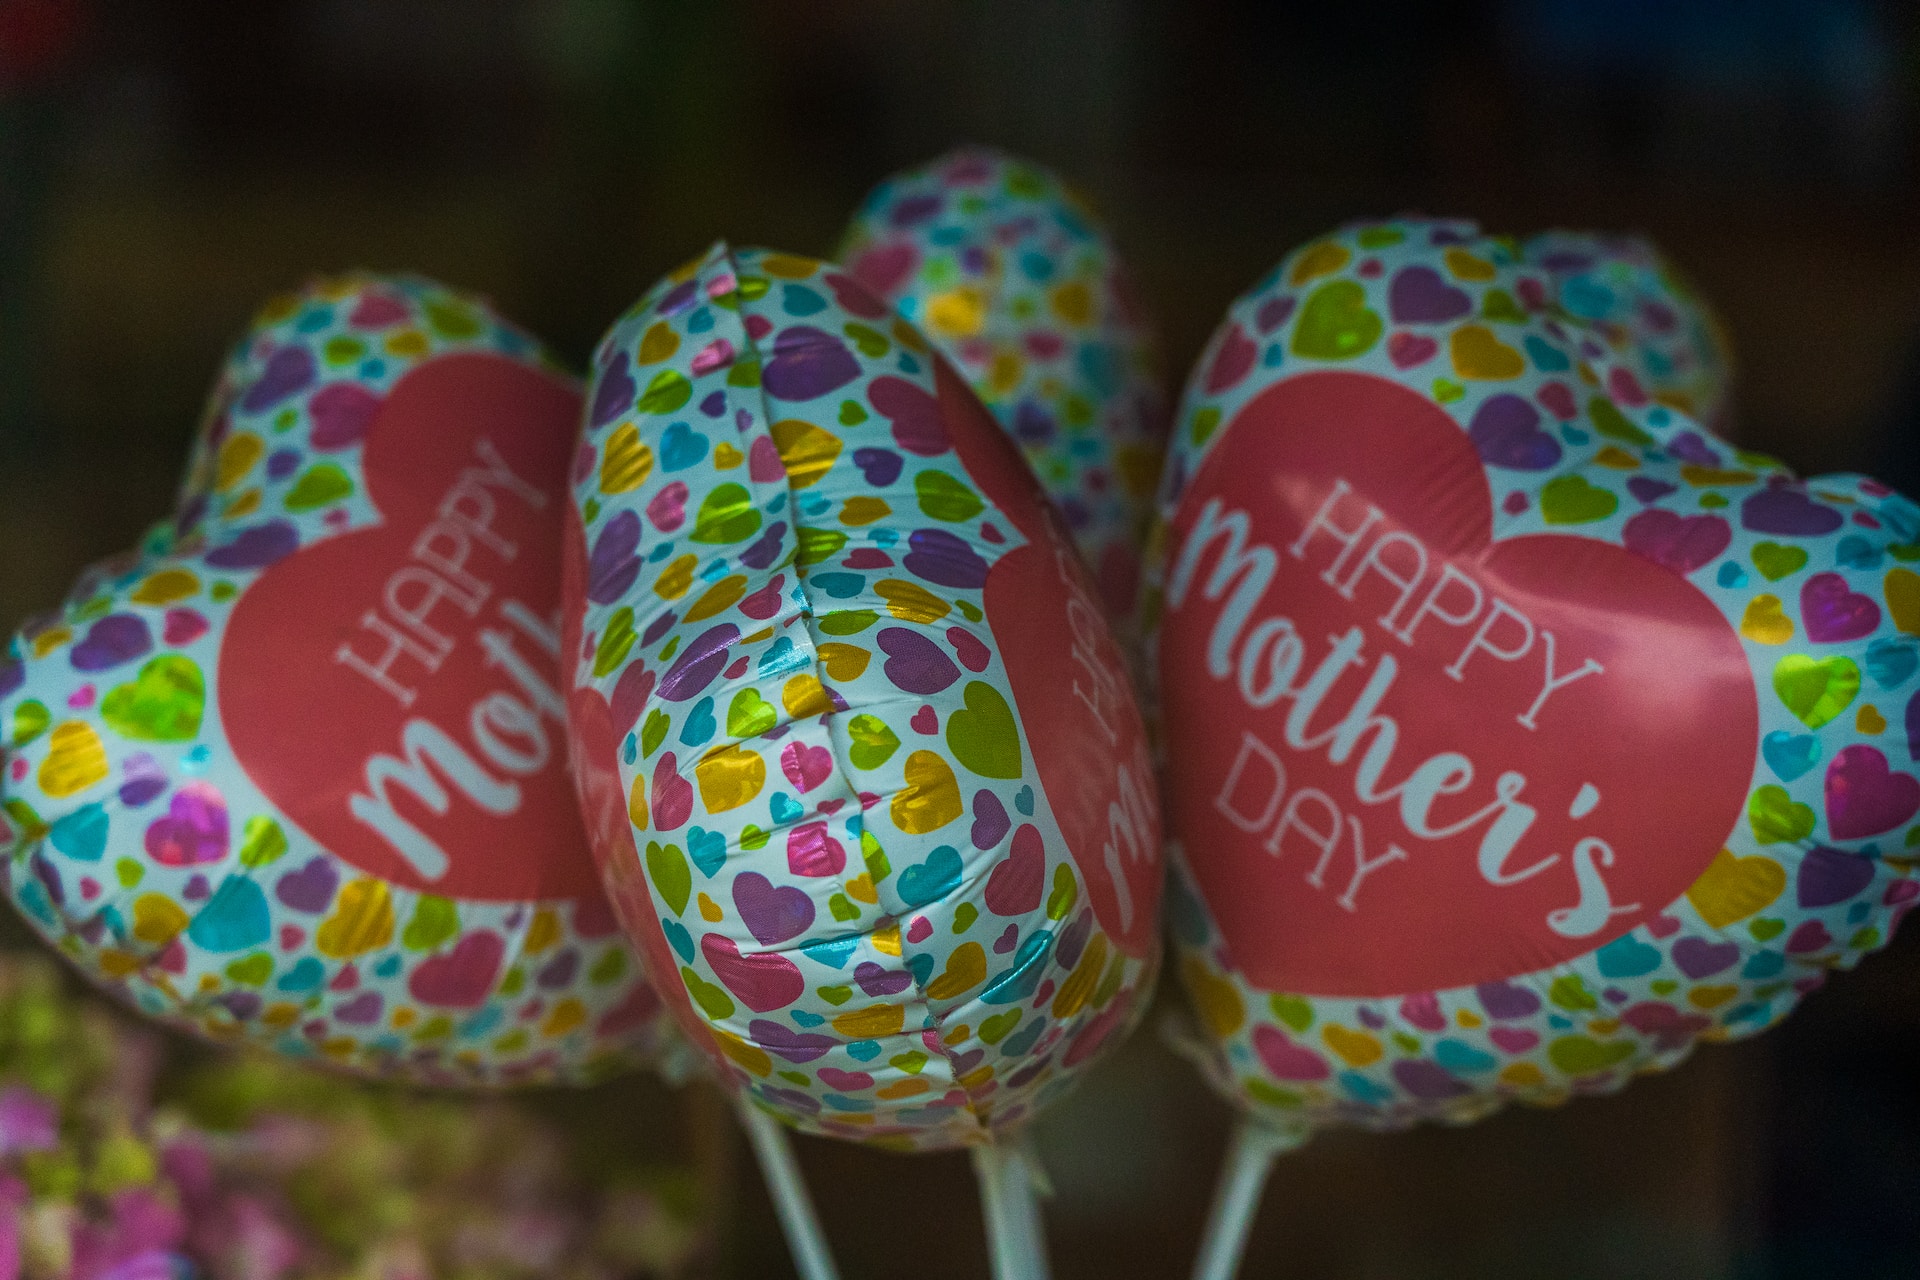 decorated party balloons with happy mother's day wishes printed